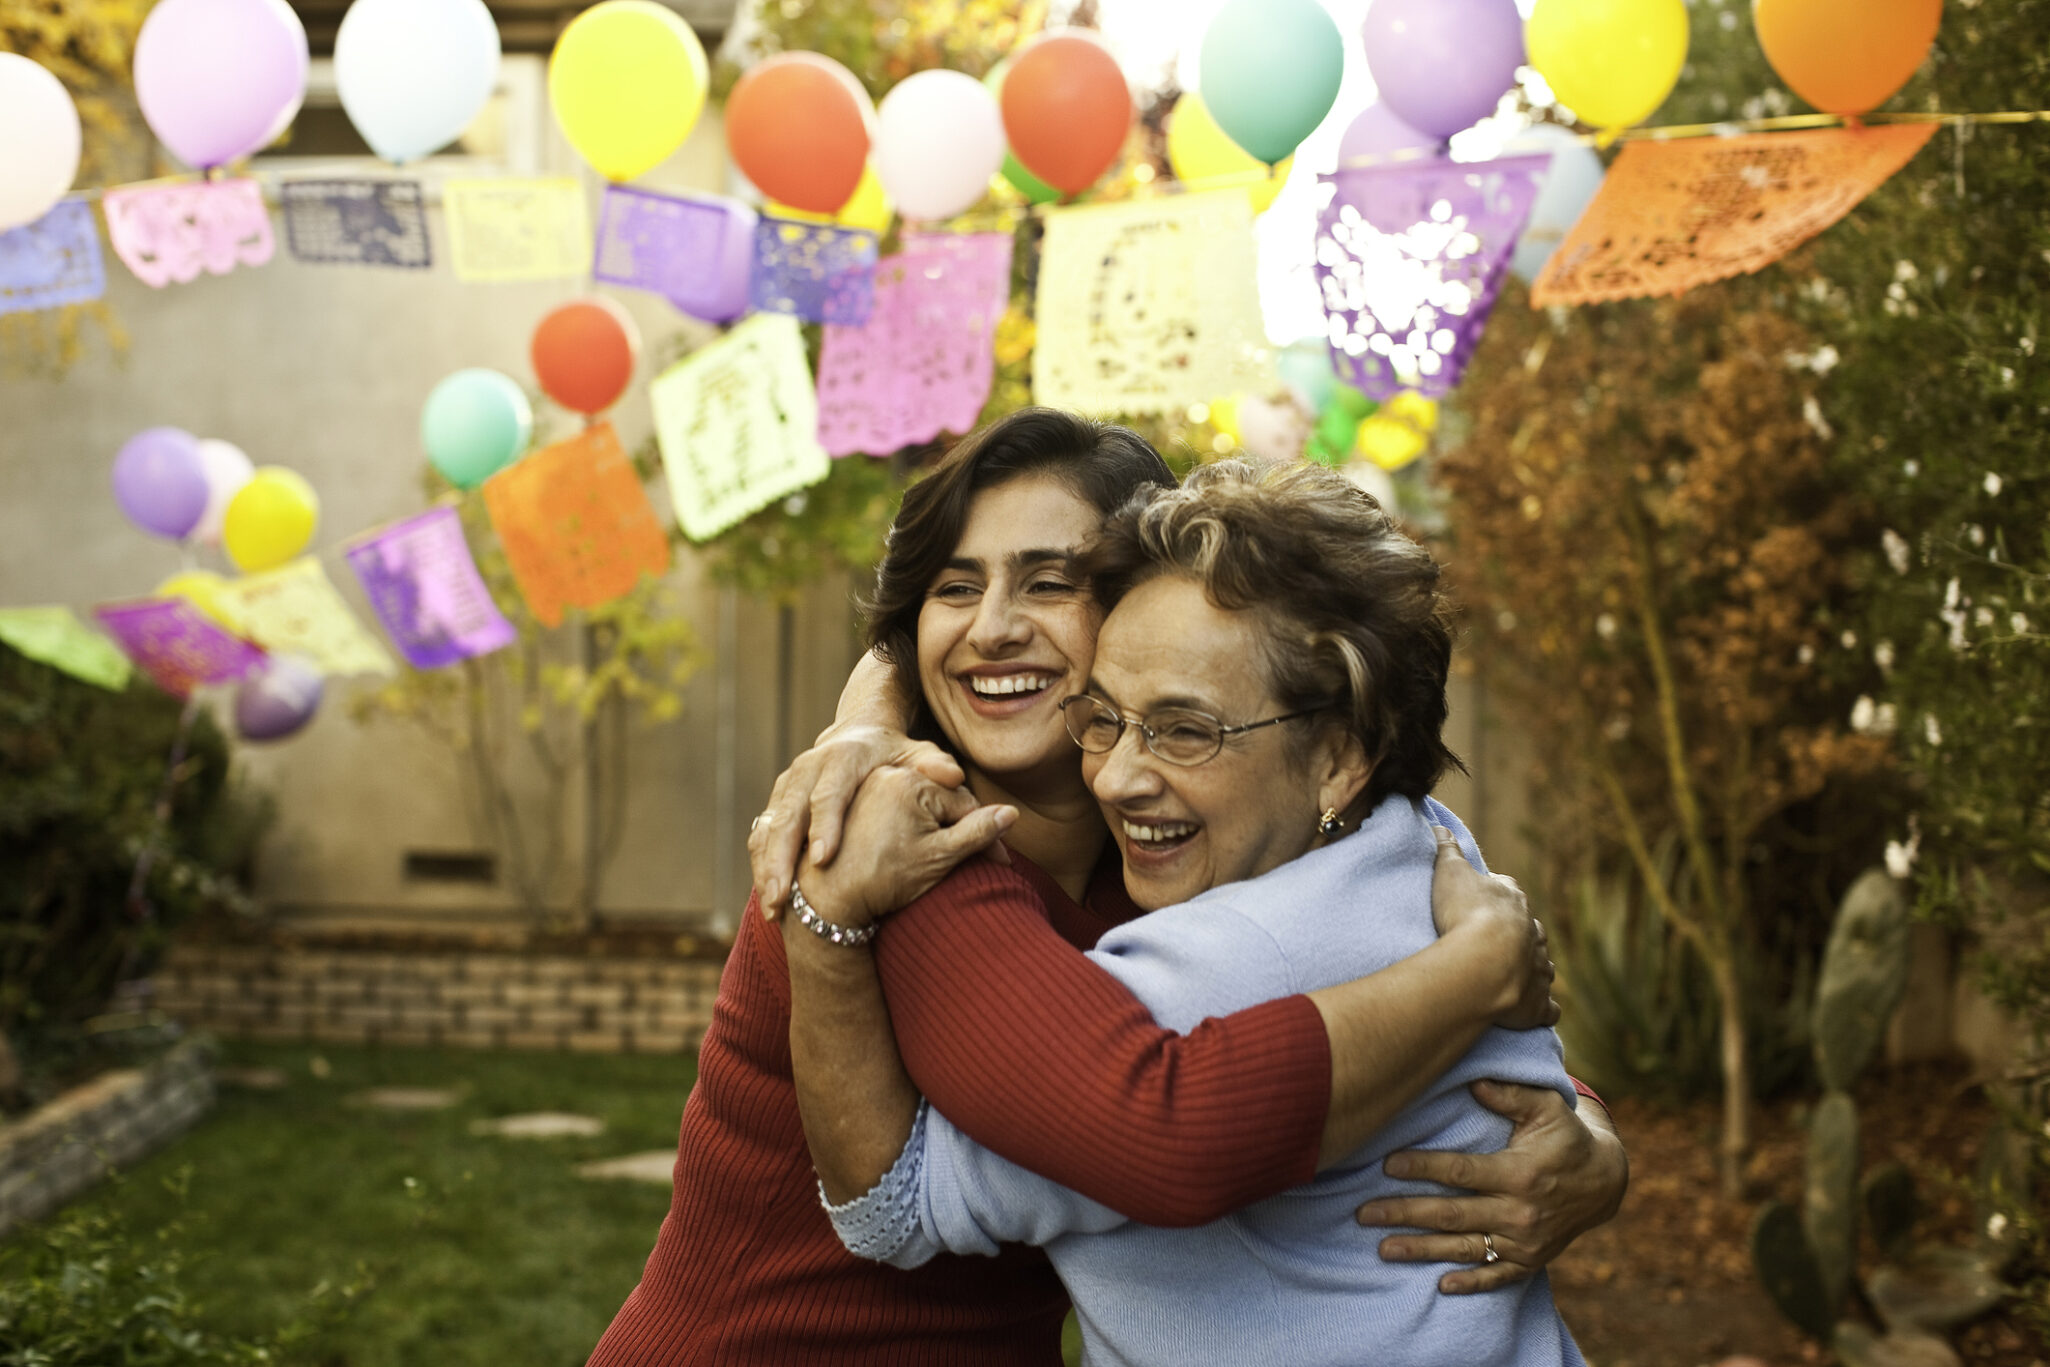 A grandmother and daughter hug at a family event